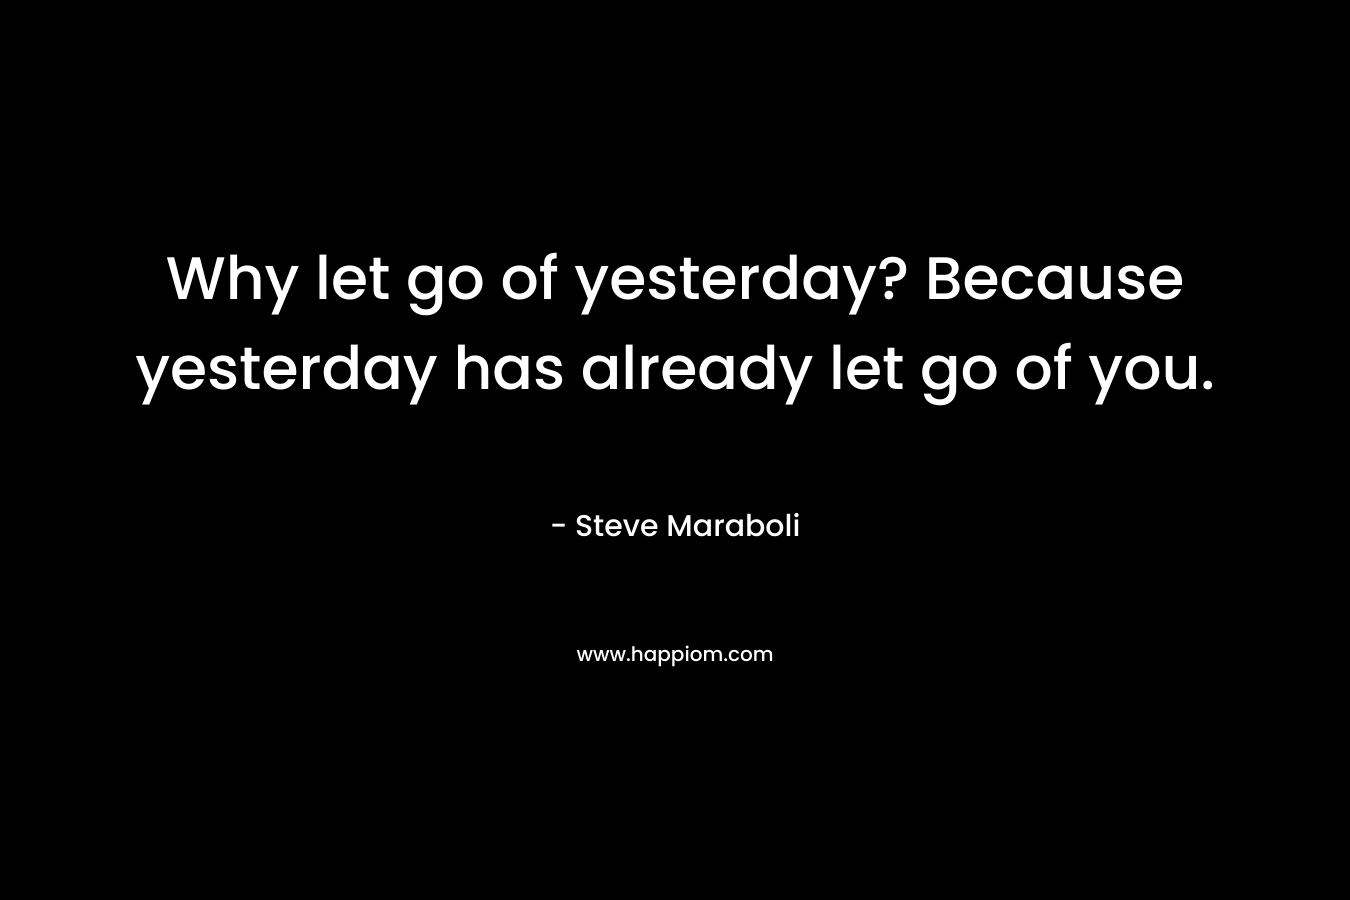 Why let go of yesterday? Because yesterday has already let go of you. – Steve Maraboli